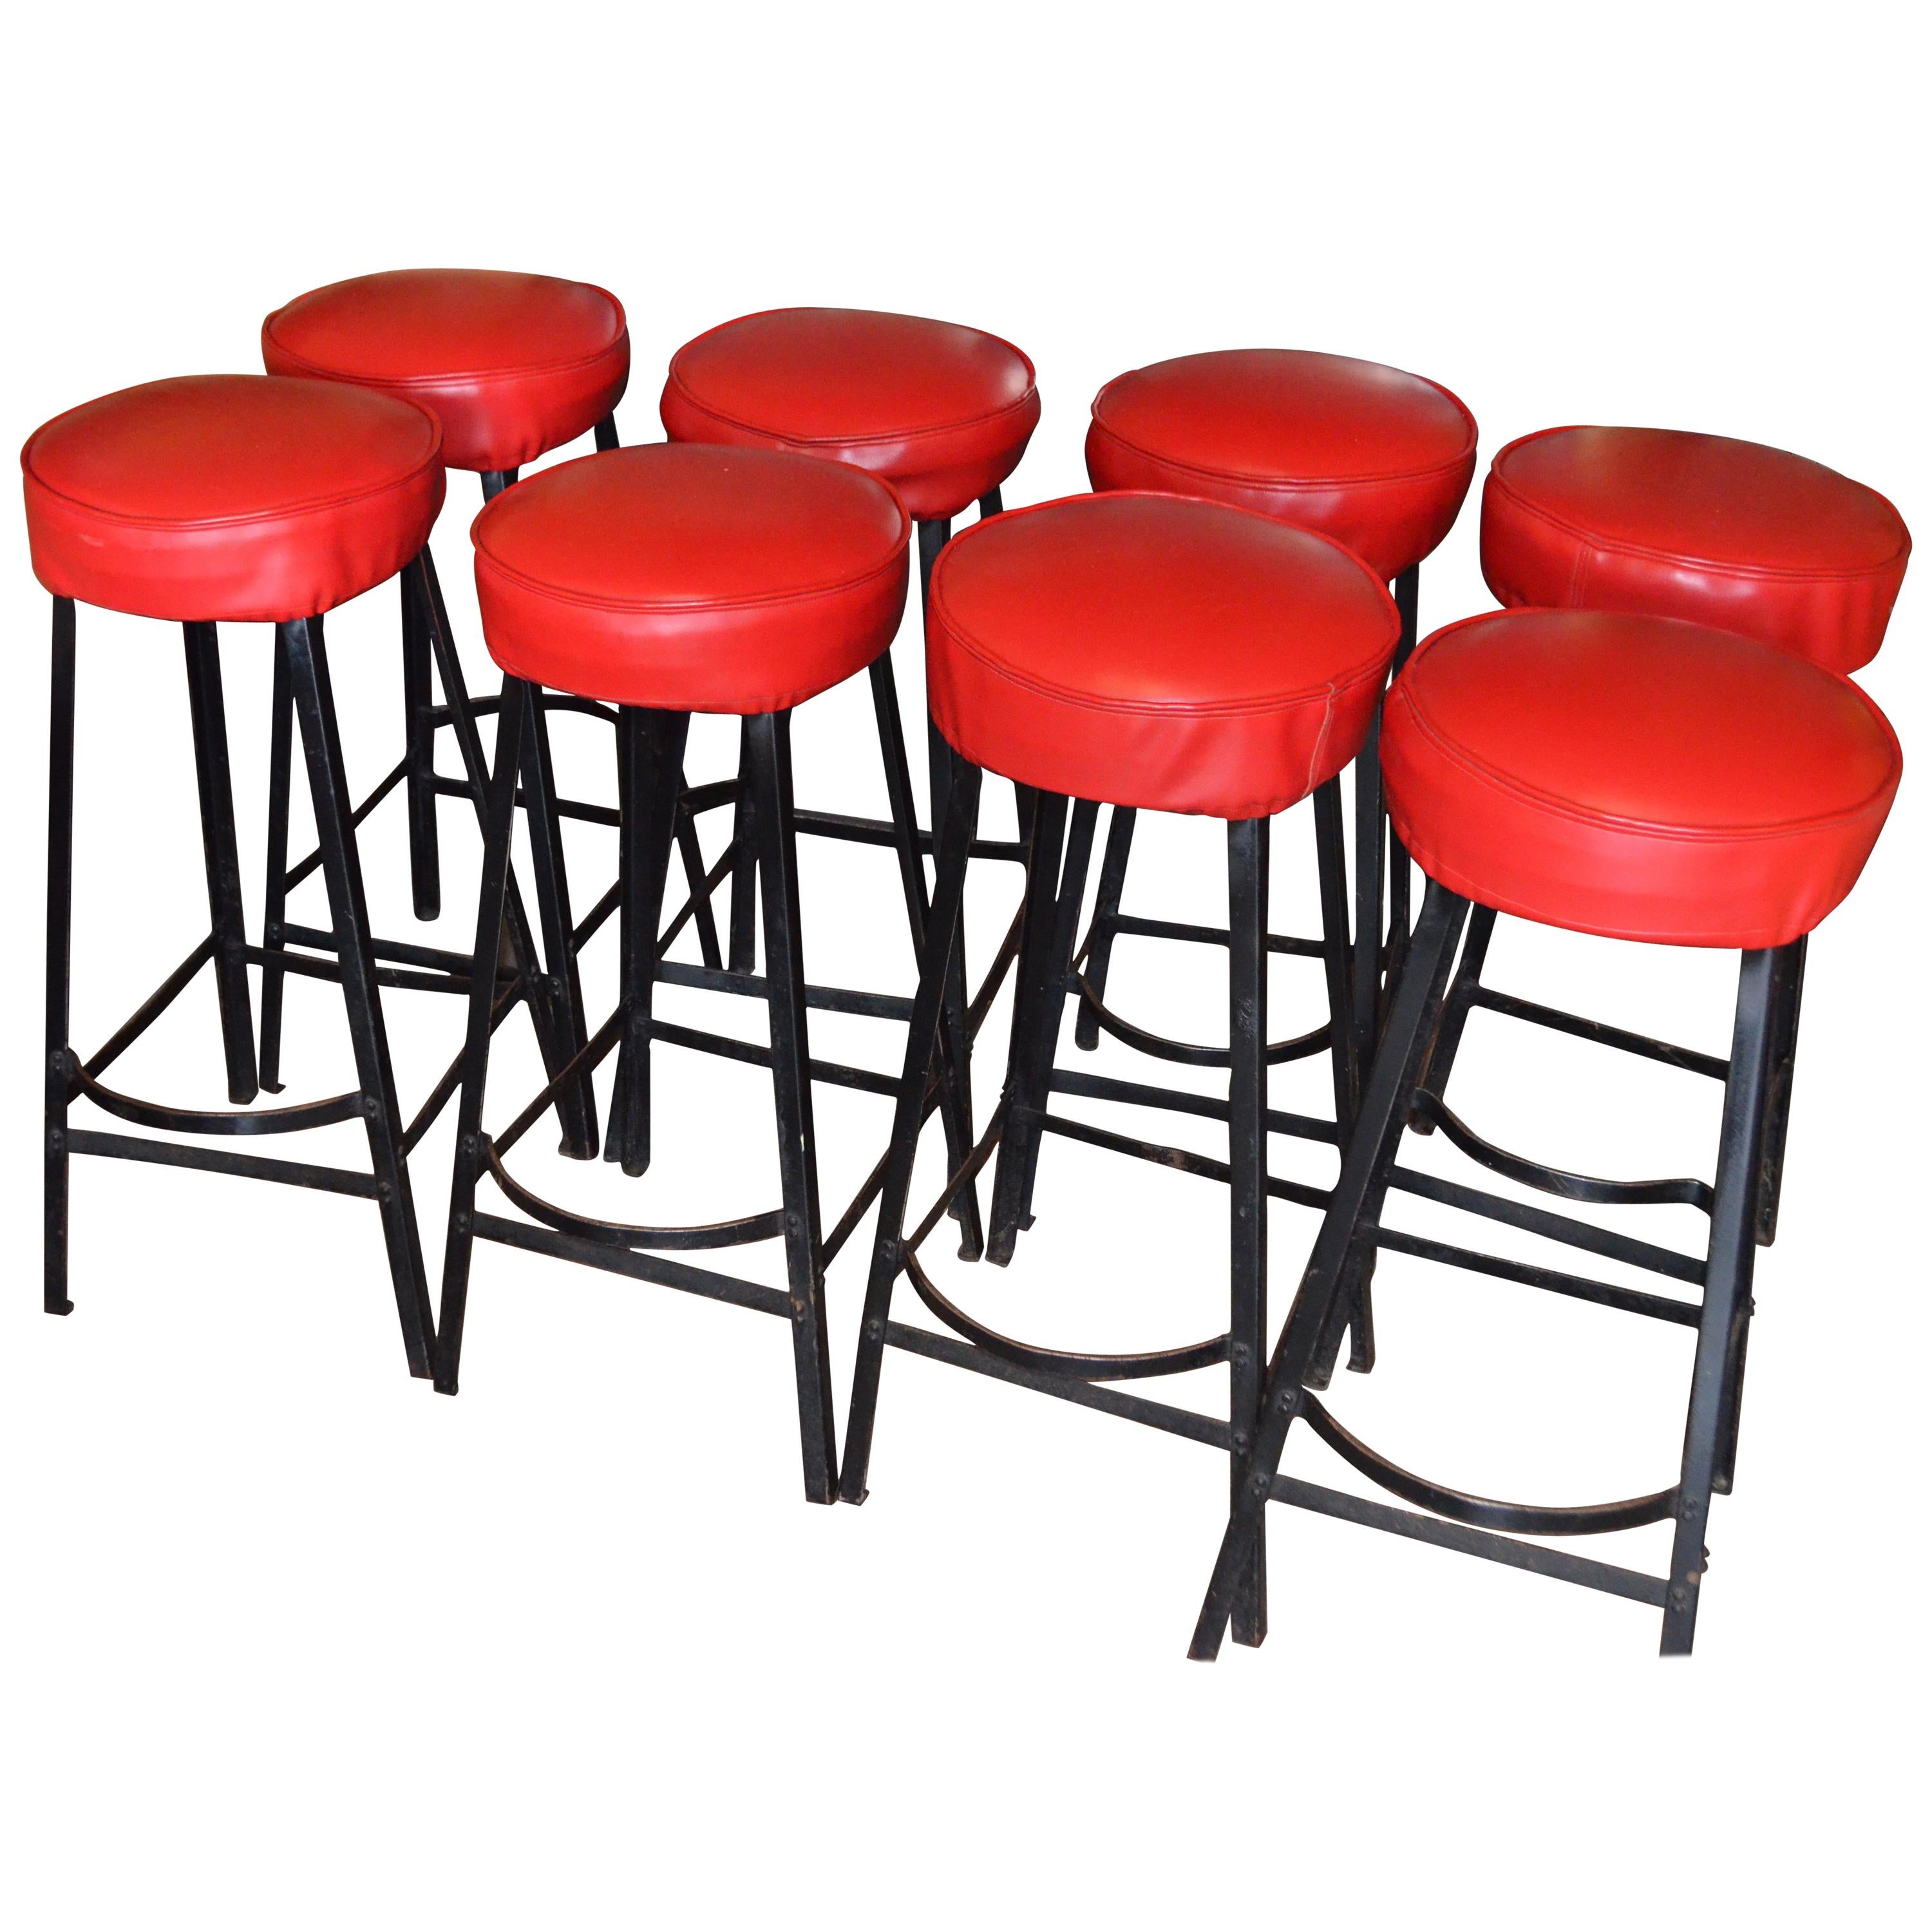 Bar Stools with Black Steel Frames and Startlingly Red Vinyl Seats. Set of 8